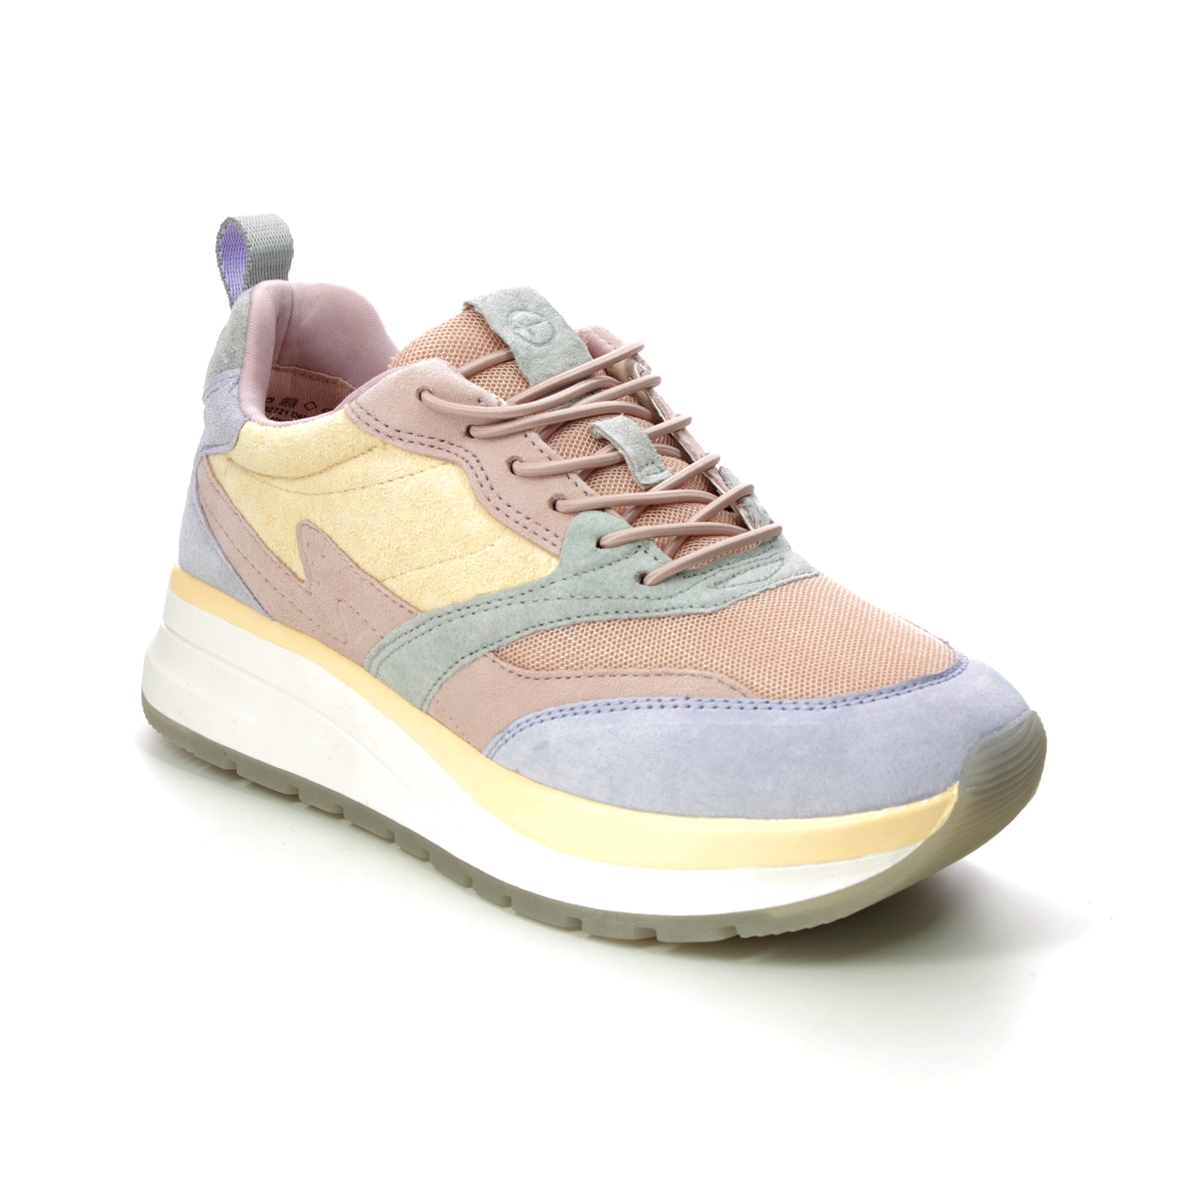 Tamaris Dluxed Yellow multi Womens trainers 23758-28-556 in a Plain Leather and Man-made in Size 38